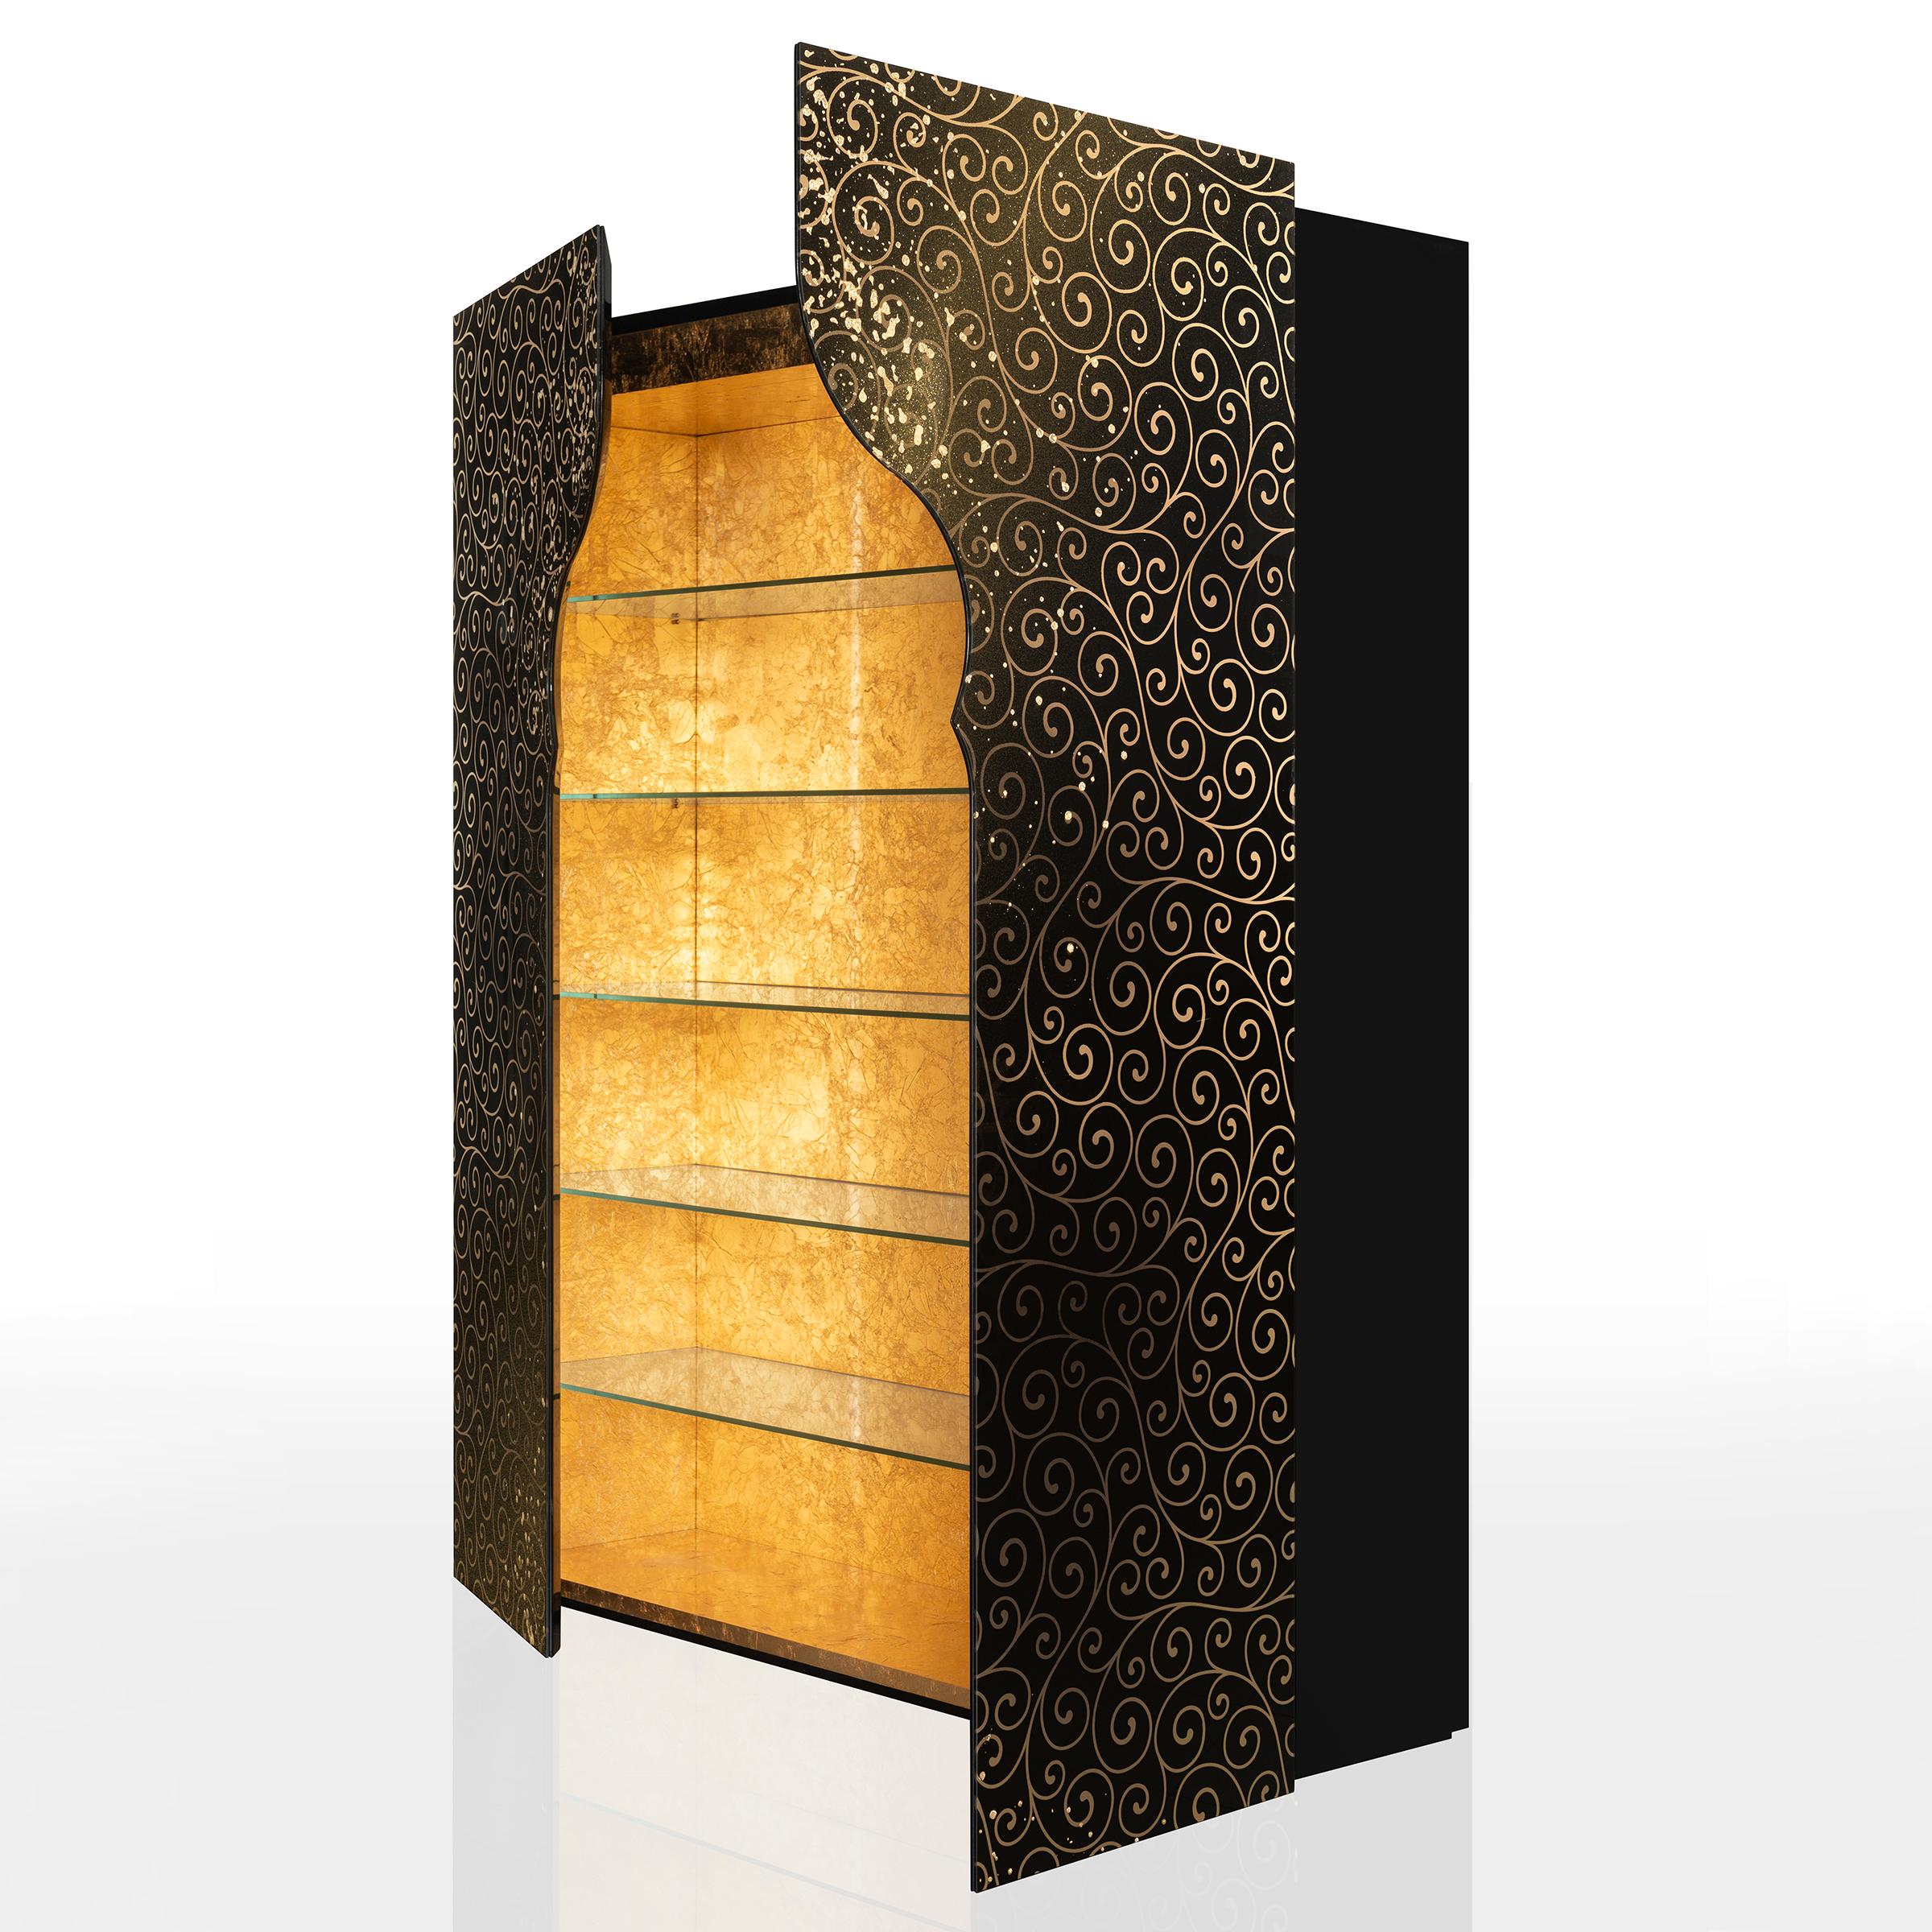 Cabinet Shelves Riyad with solid wood black lacquered finish case structure,
with 2 front doors in extra-clear tempered shaped glass, 6mm thickness, with
black background which is handcrafted sandblasting decorated with gold leaf
inserts and with